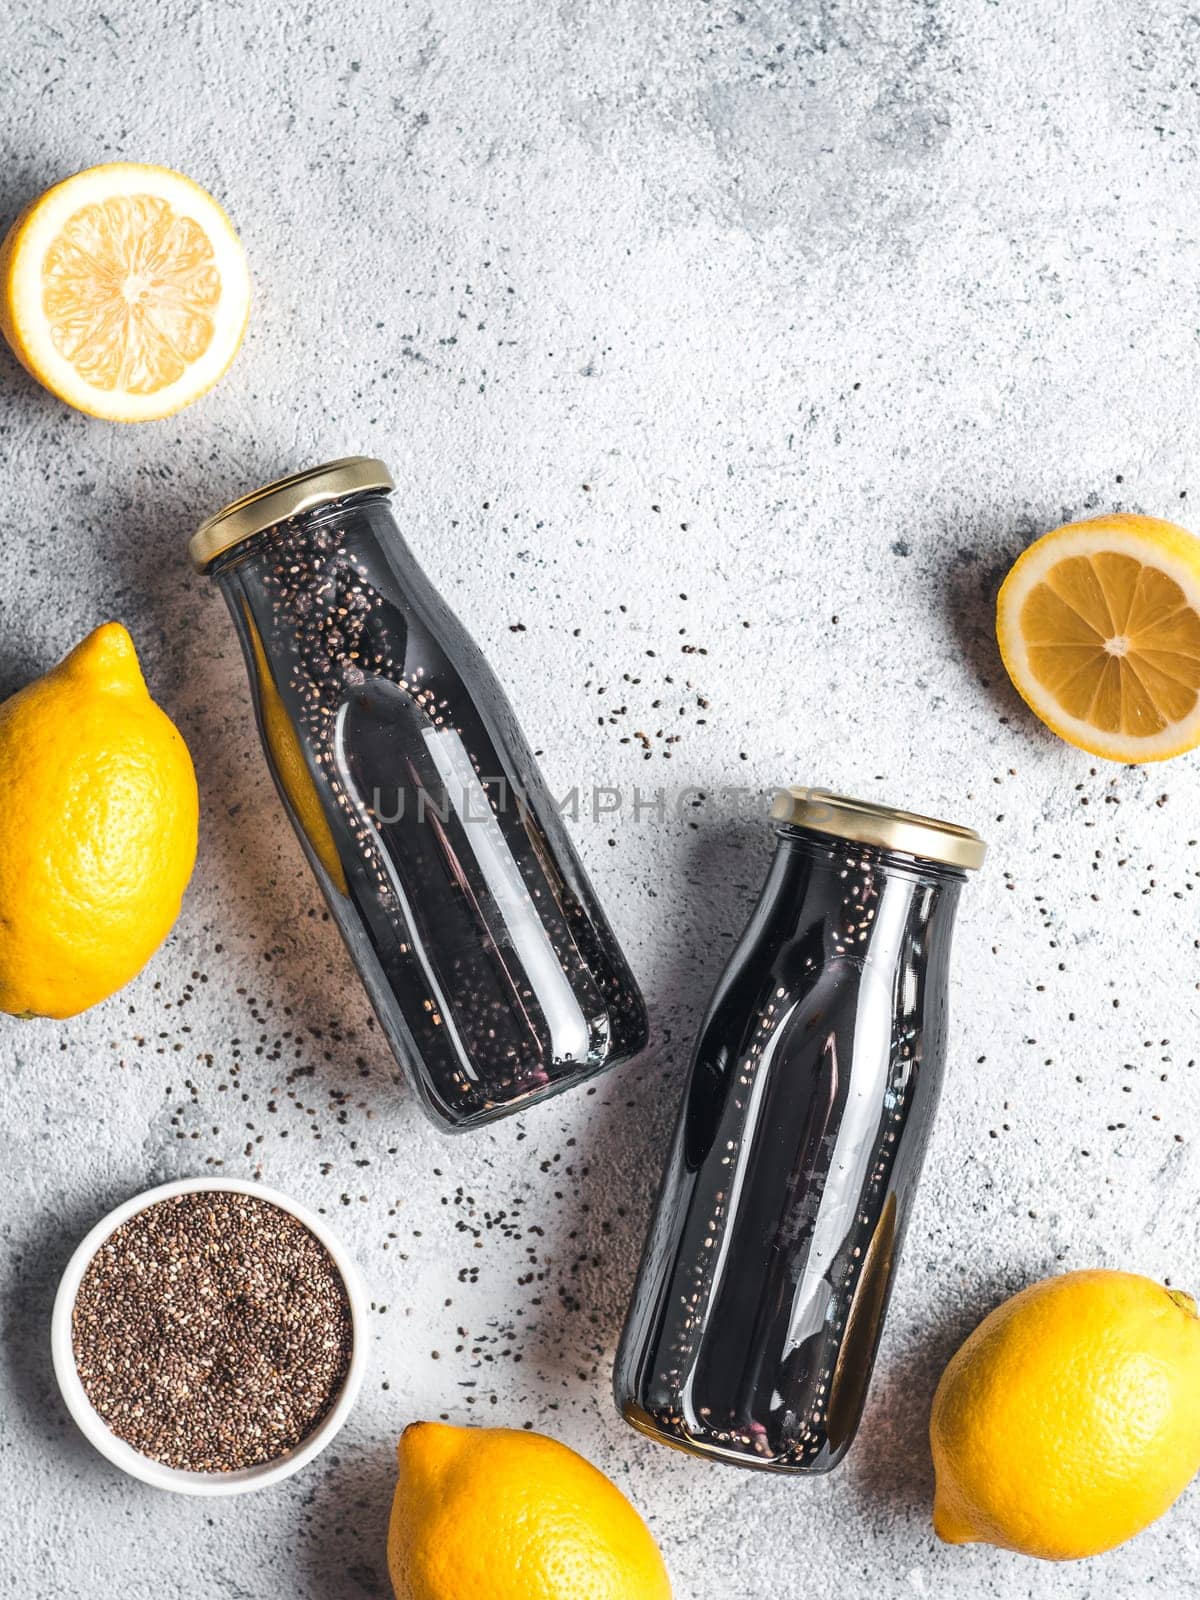 Detox activated charcoal black chia water or lemonade with lemon. Two bottle with black chia infused water. Detox drink idea and recipe. Vegan food and drink. Top view. Copy space for text. Vertical.